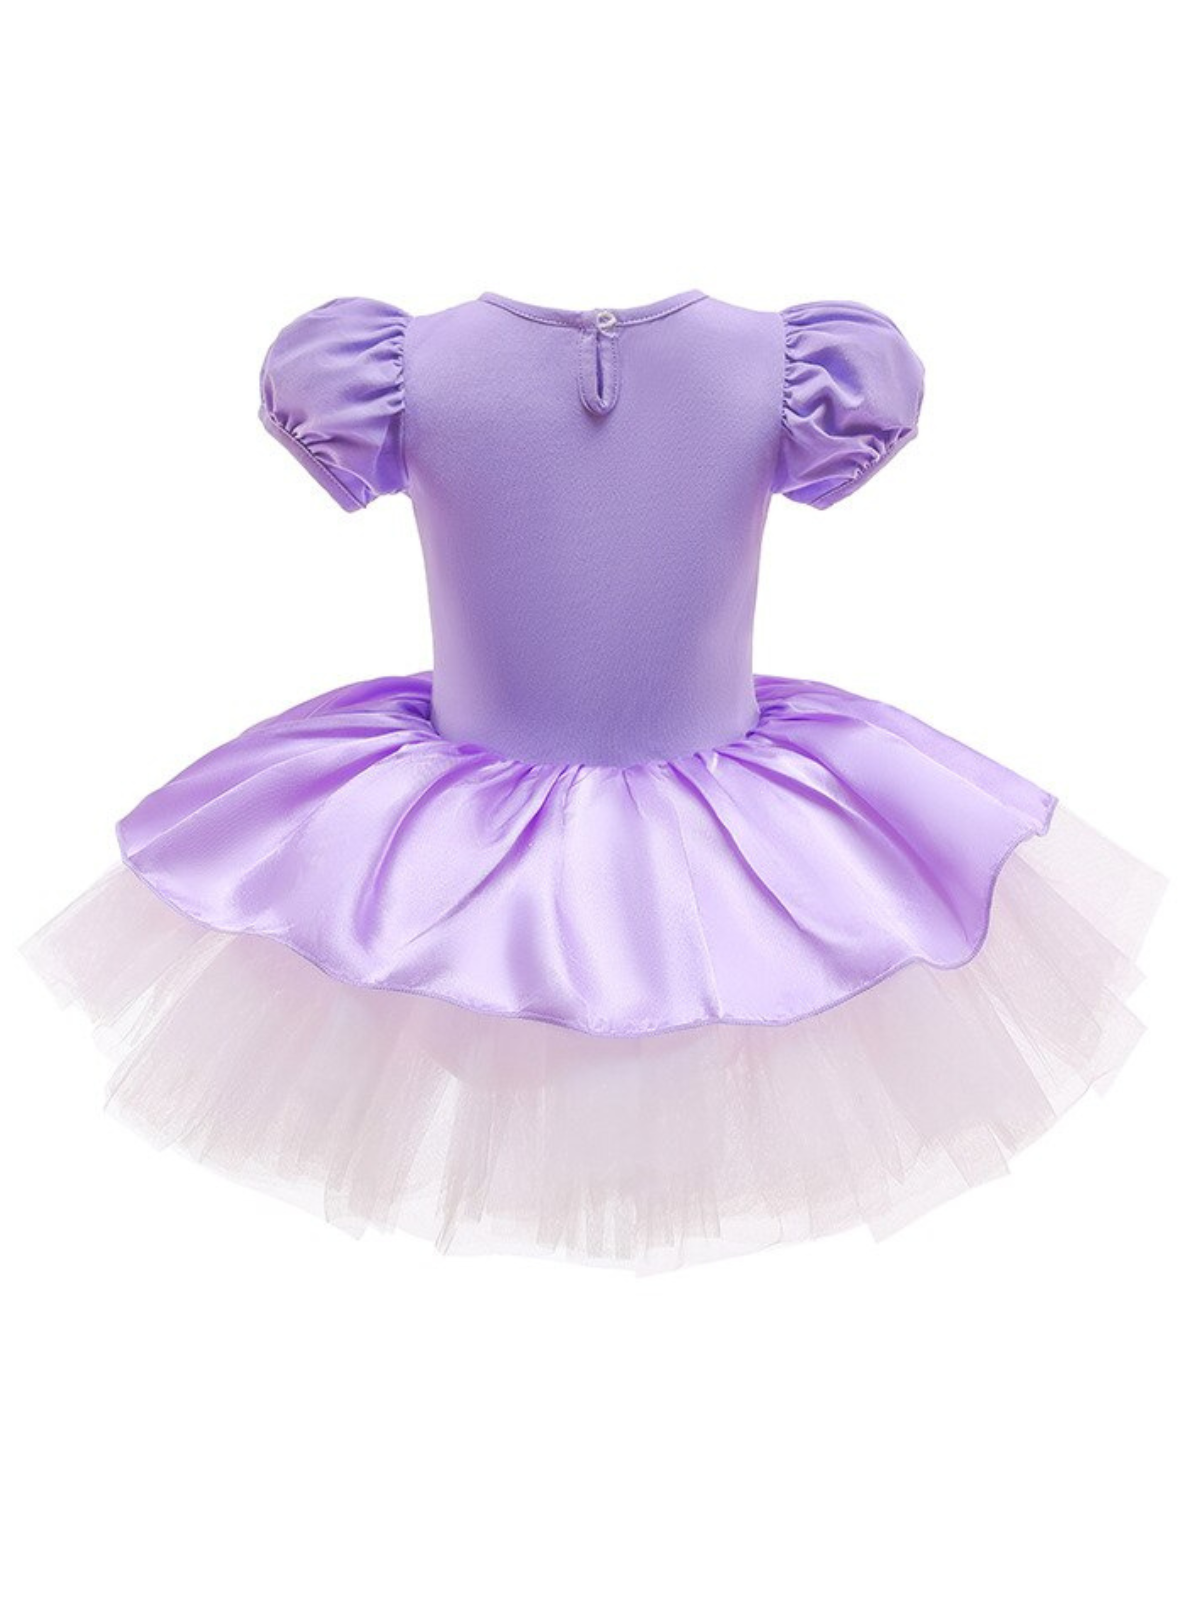 Little Girls Princess Dresses | Young Royalty Pearled Ballerina Dress